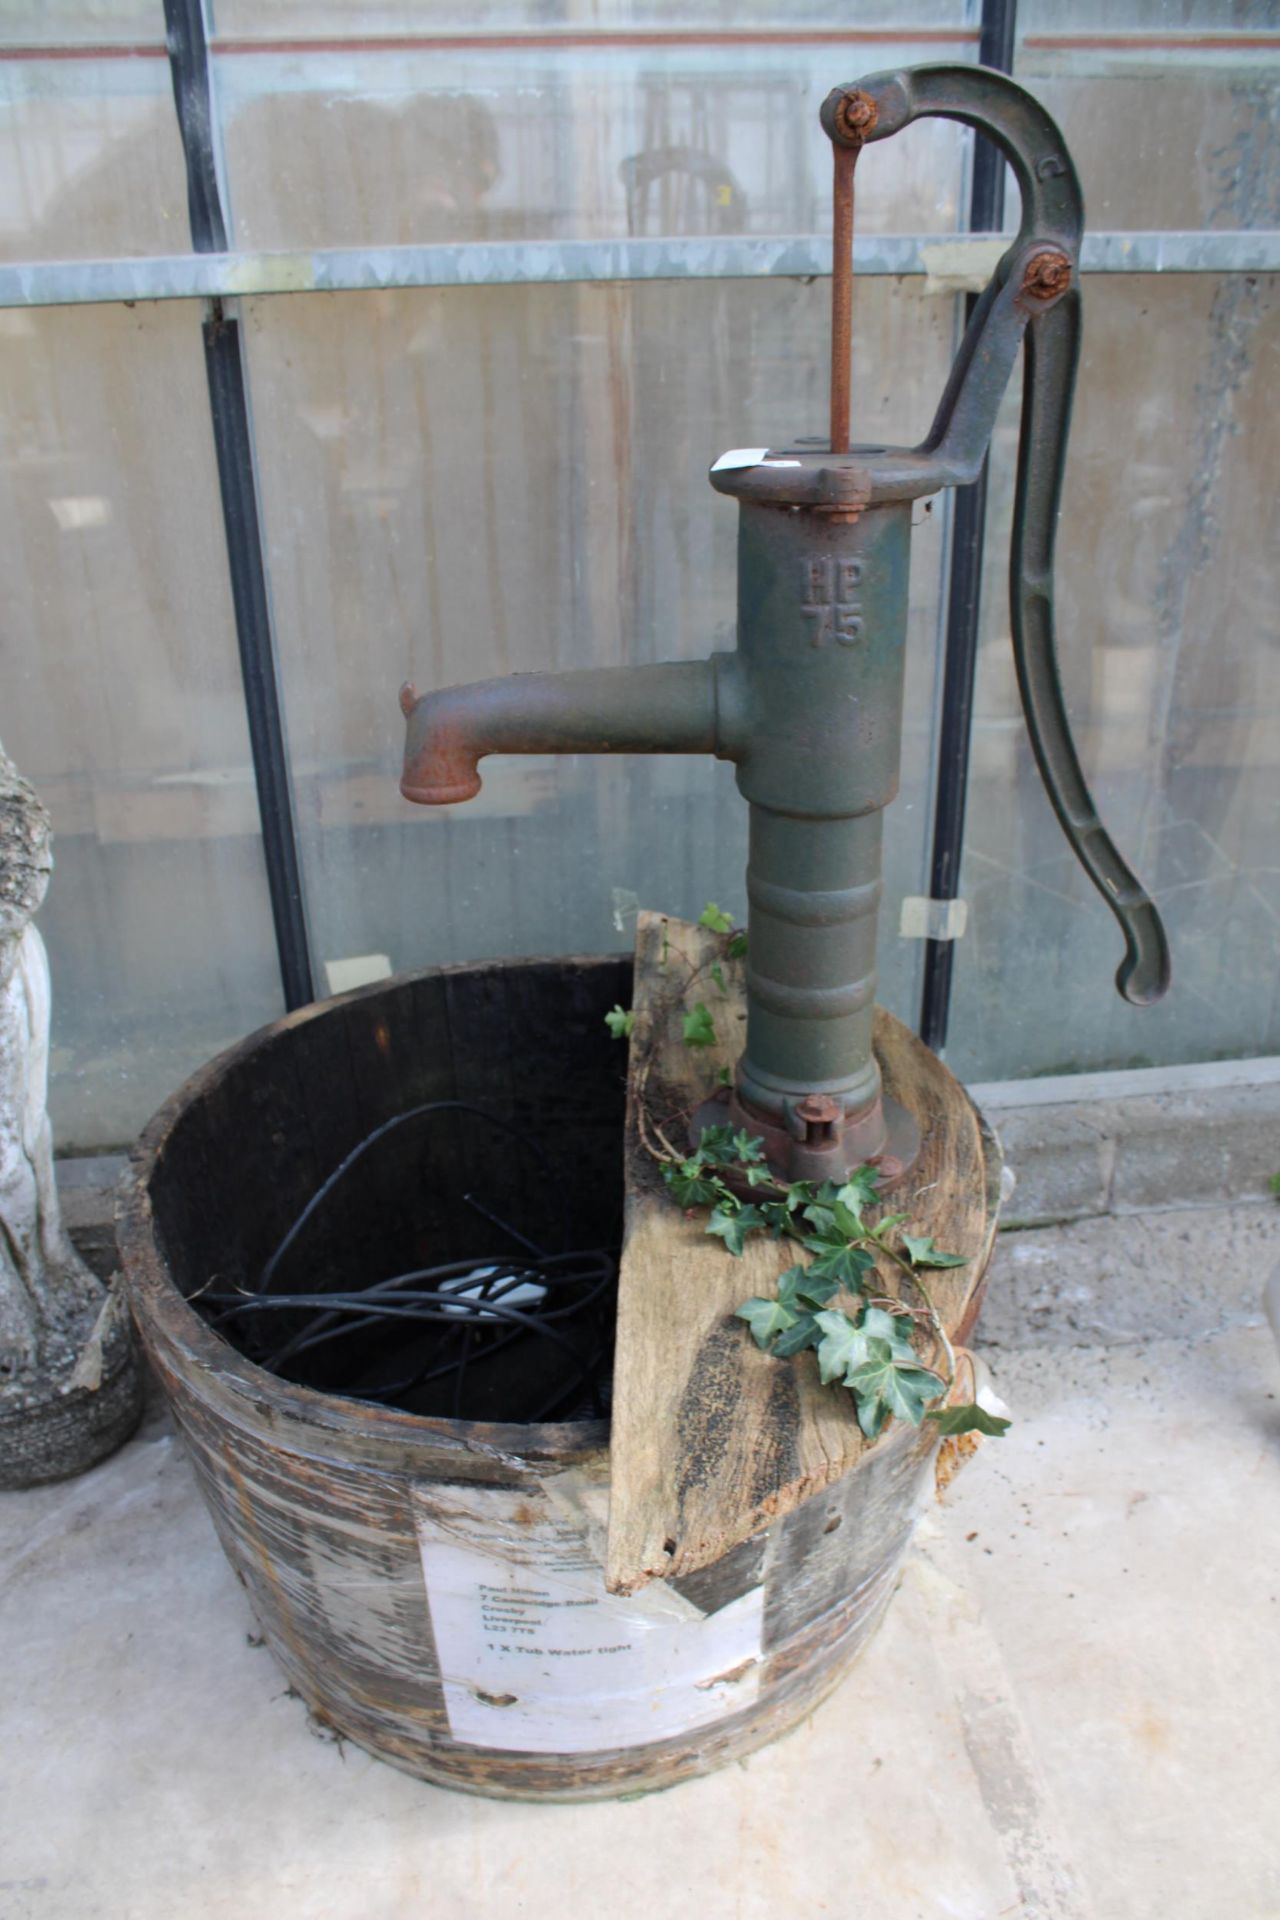 A VINTAGE WOODEN BARREL WATER FEATURE WITH VINTAGE CAST IRON WATER PUMP AND ELECTRIC PUMP